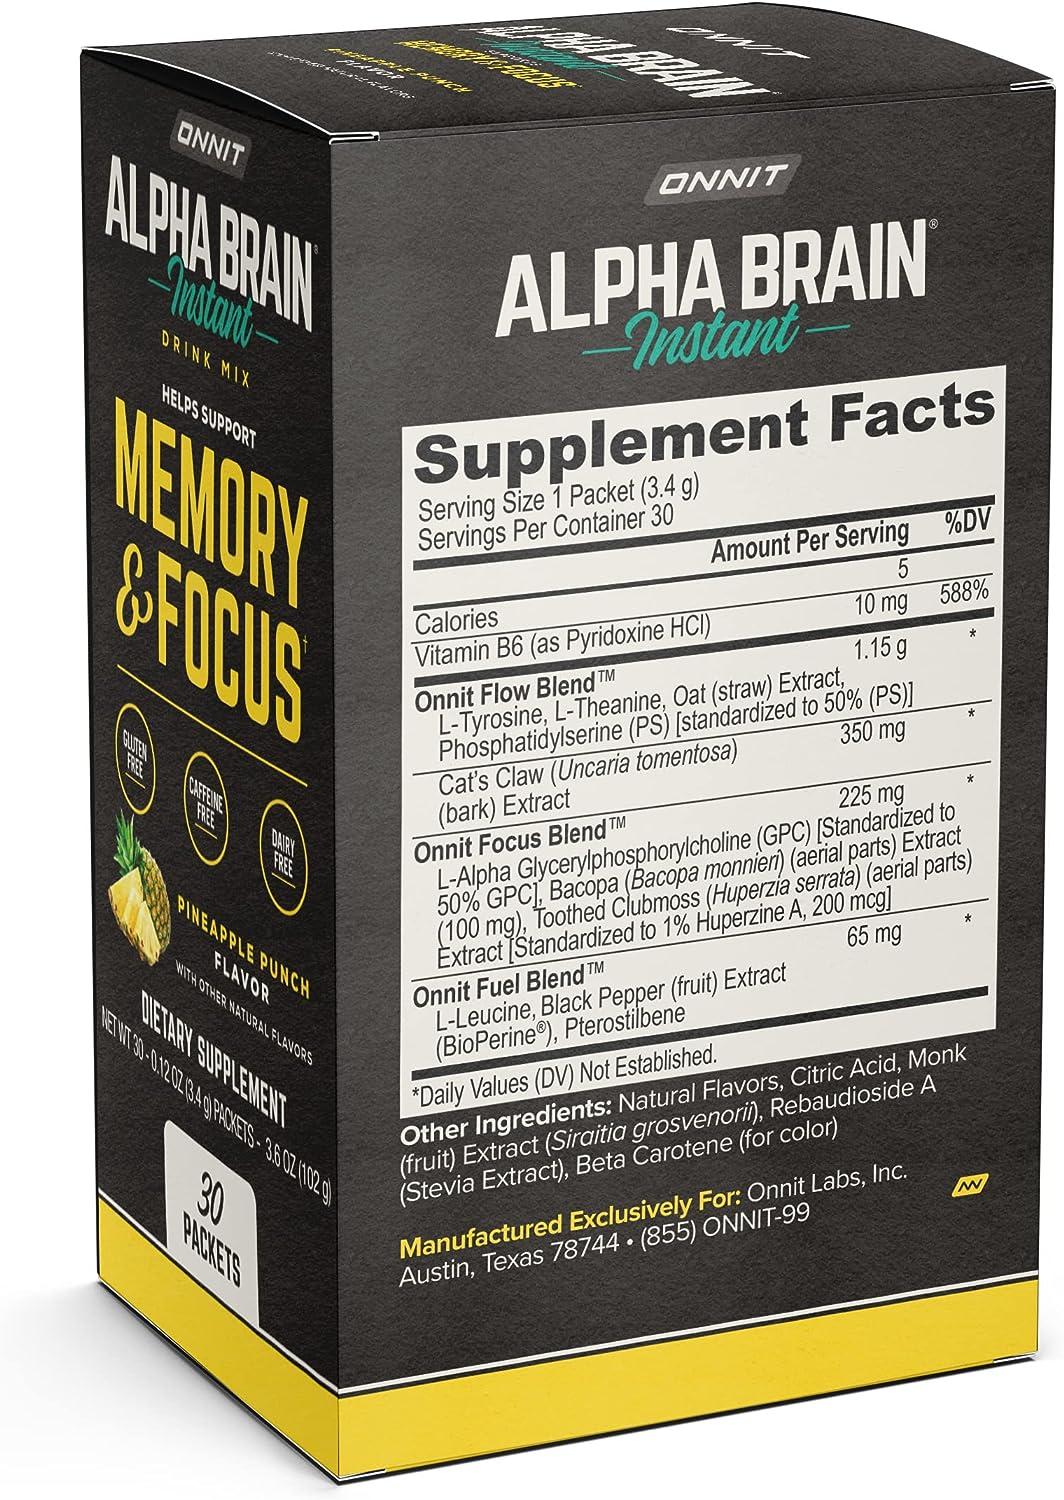 ONNIT Alpha Brain Instant - Pineapple Punch Flavor - Nootropic 